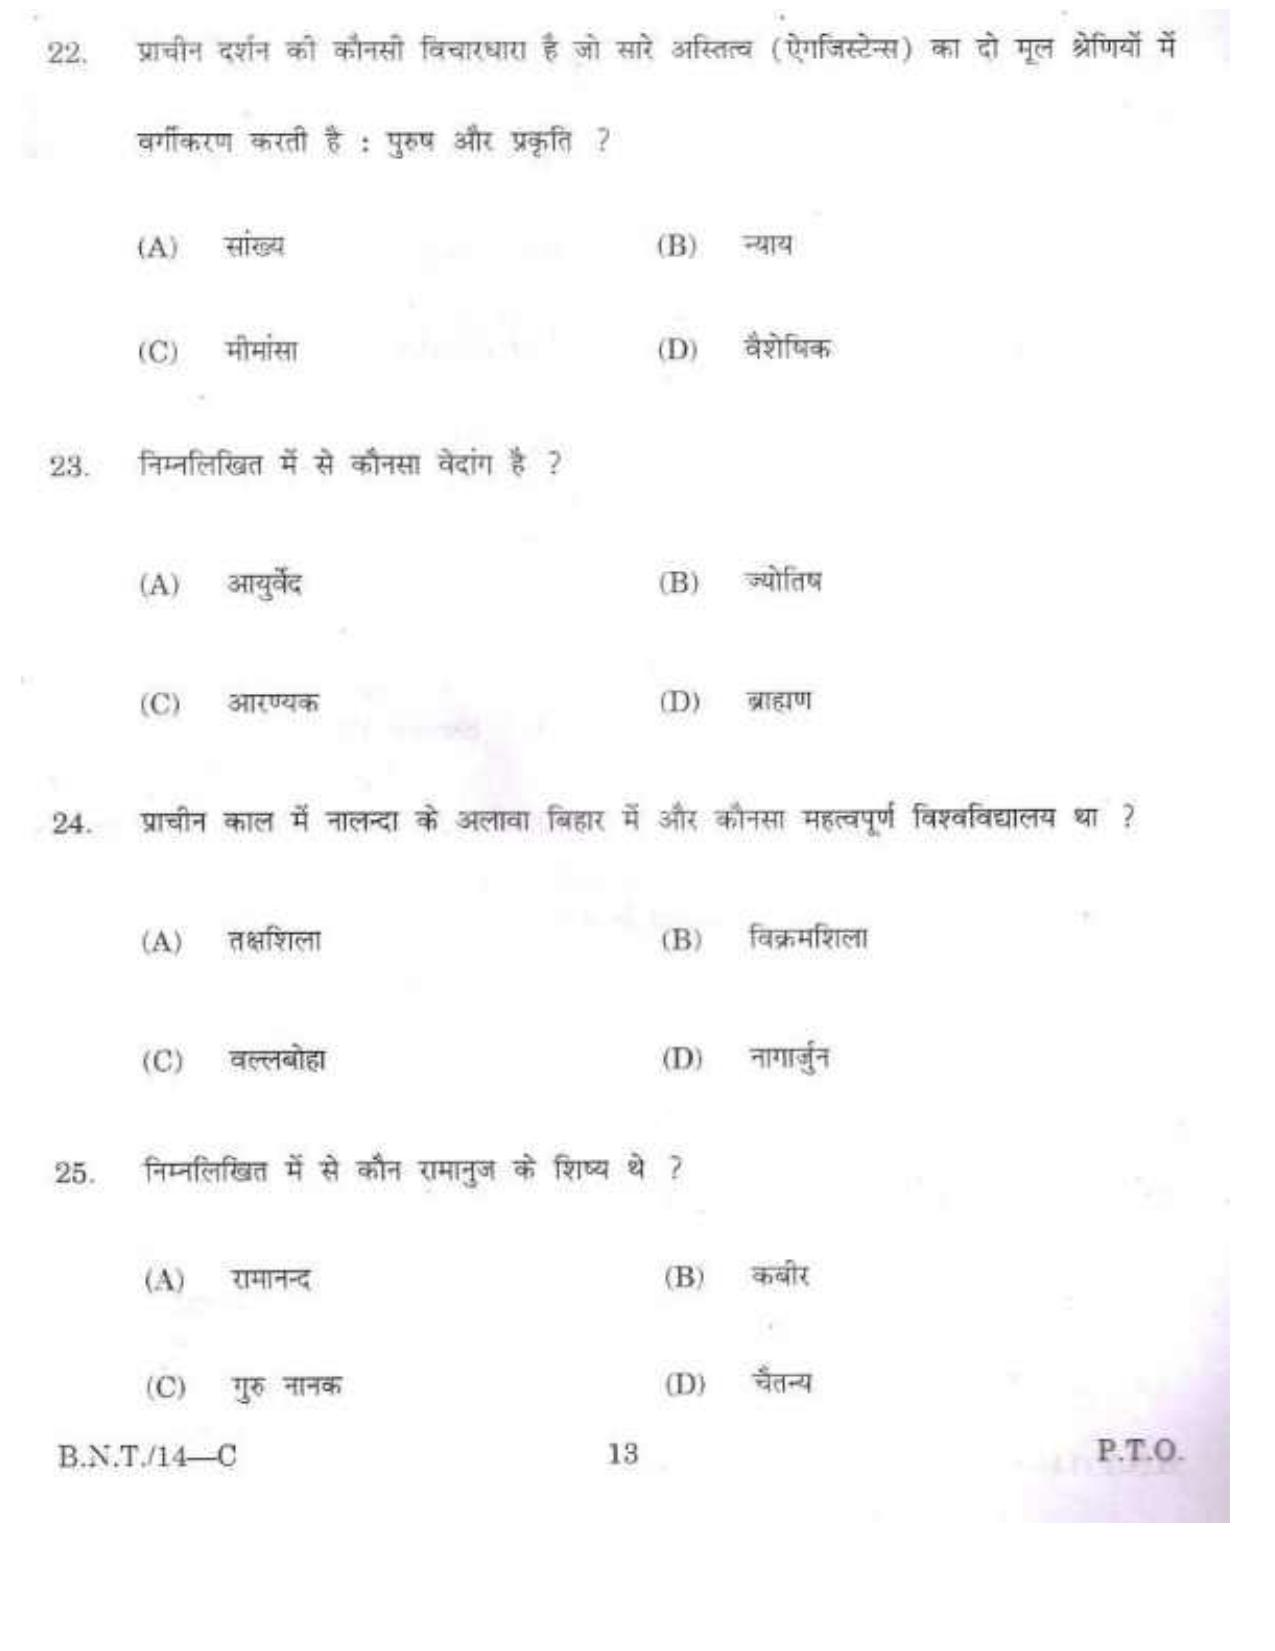 BSMFC Recovery Agent Old Question Papers for General Knowledge - Page 13